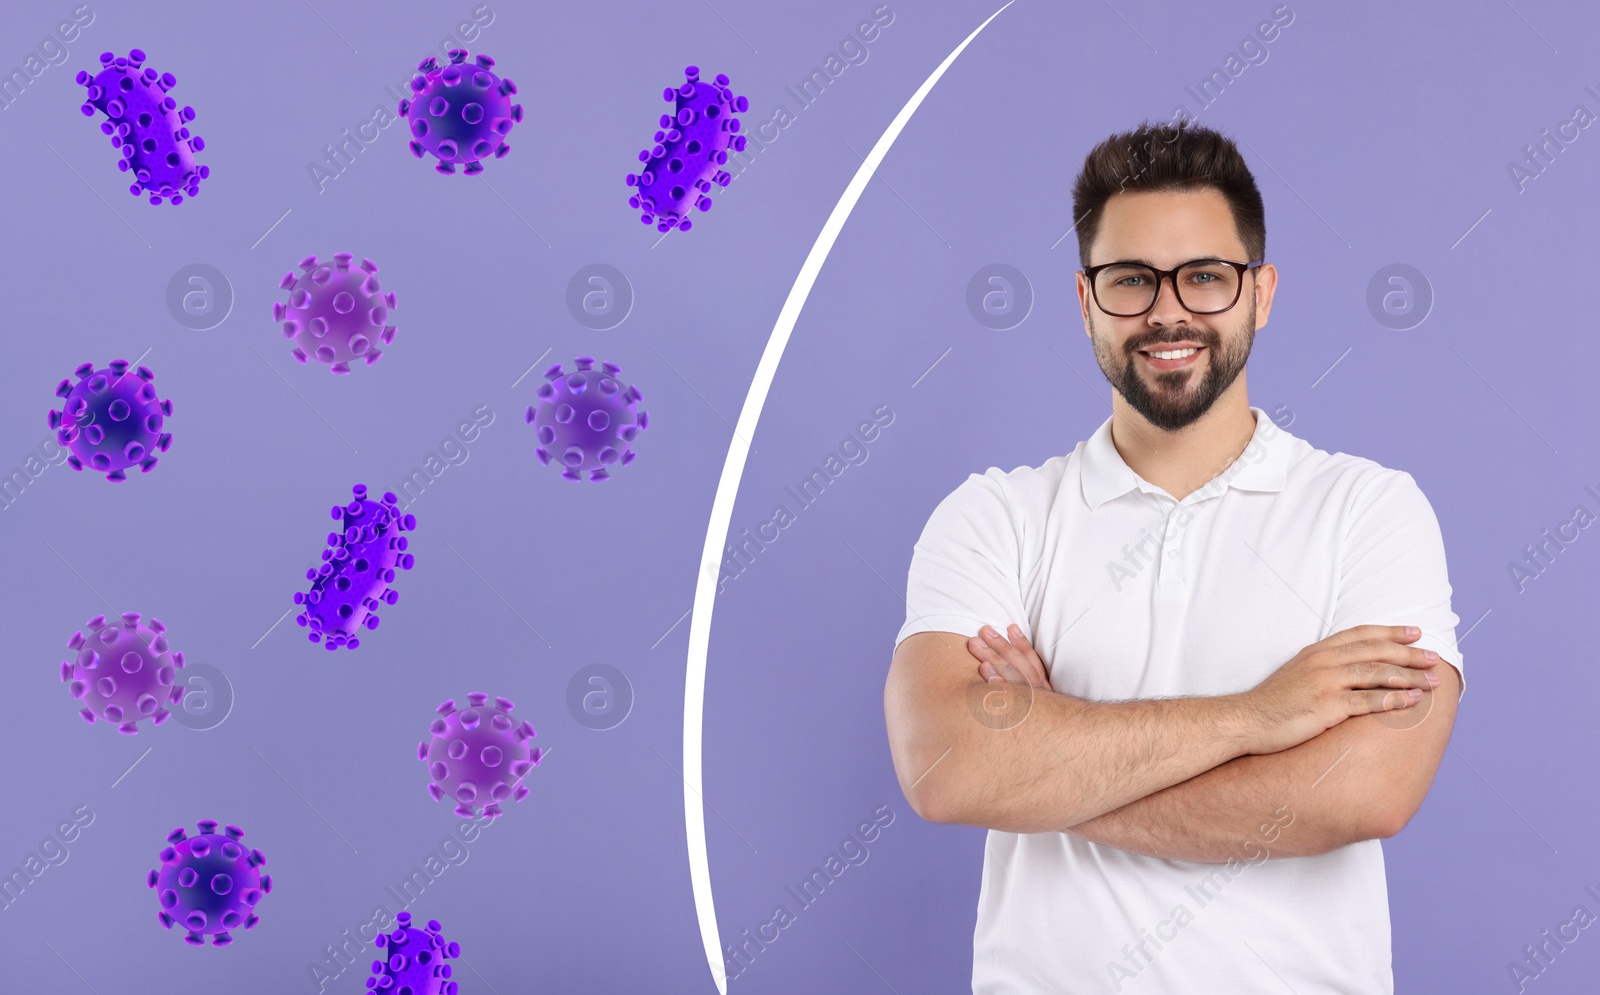 Image of Man with strong immunity surrounded by viruses on violet background